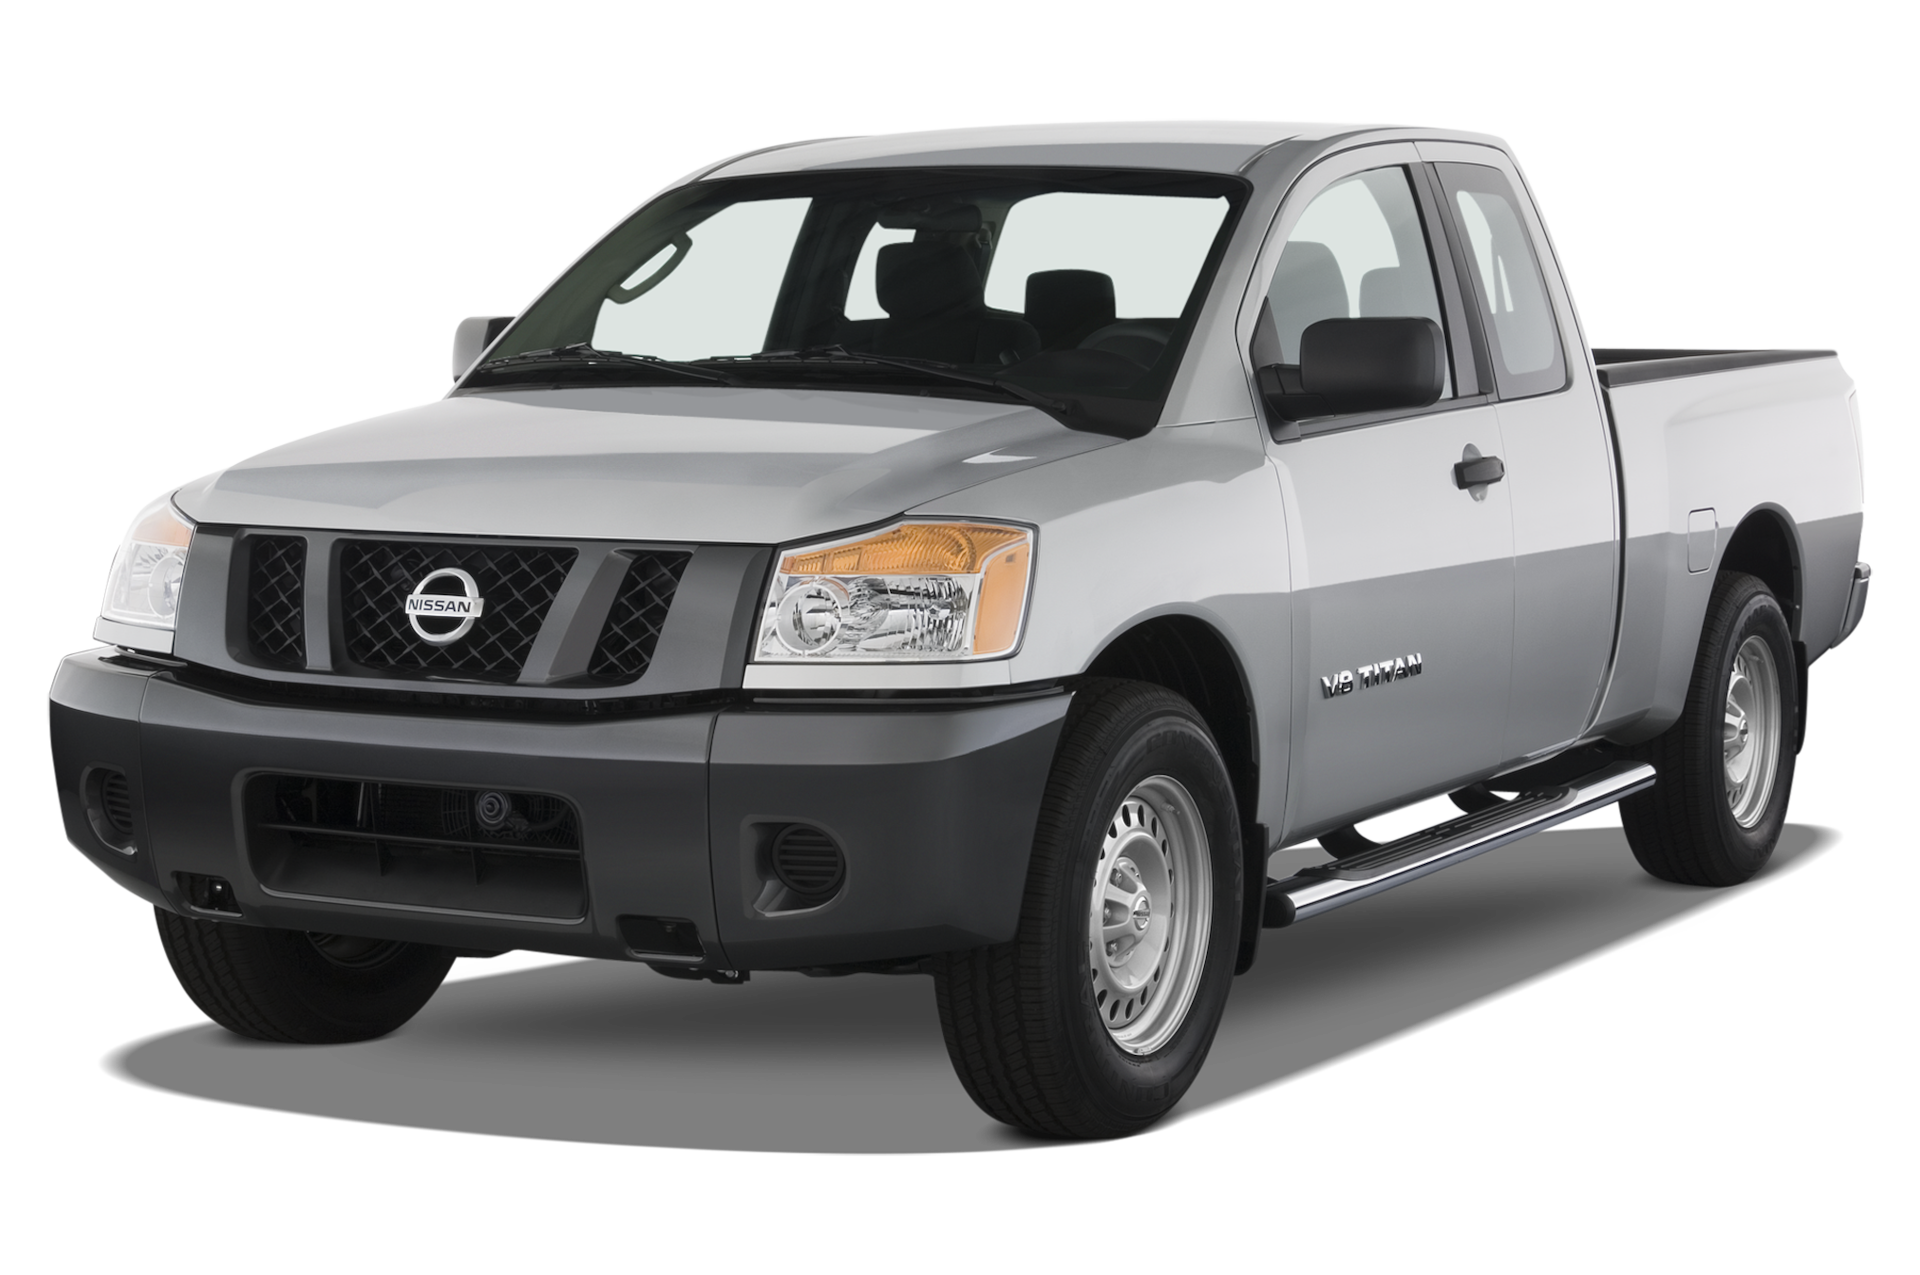 2012 Nissan Titan Prices, Reviews, and Photos - MotorTrend